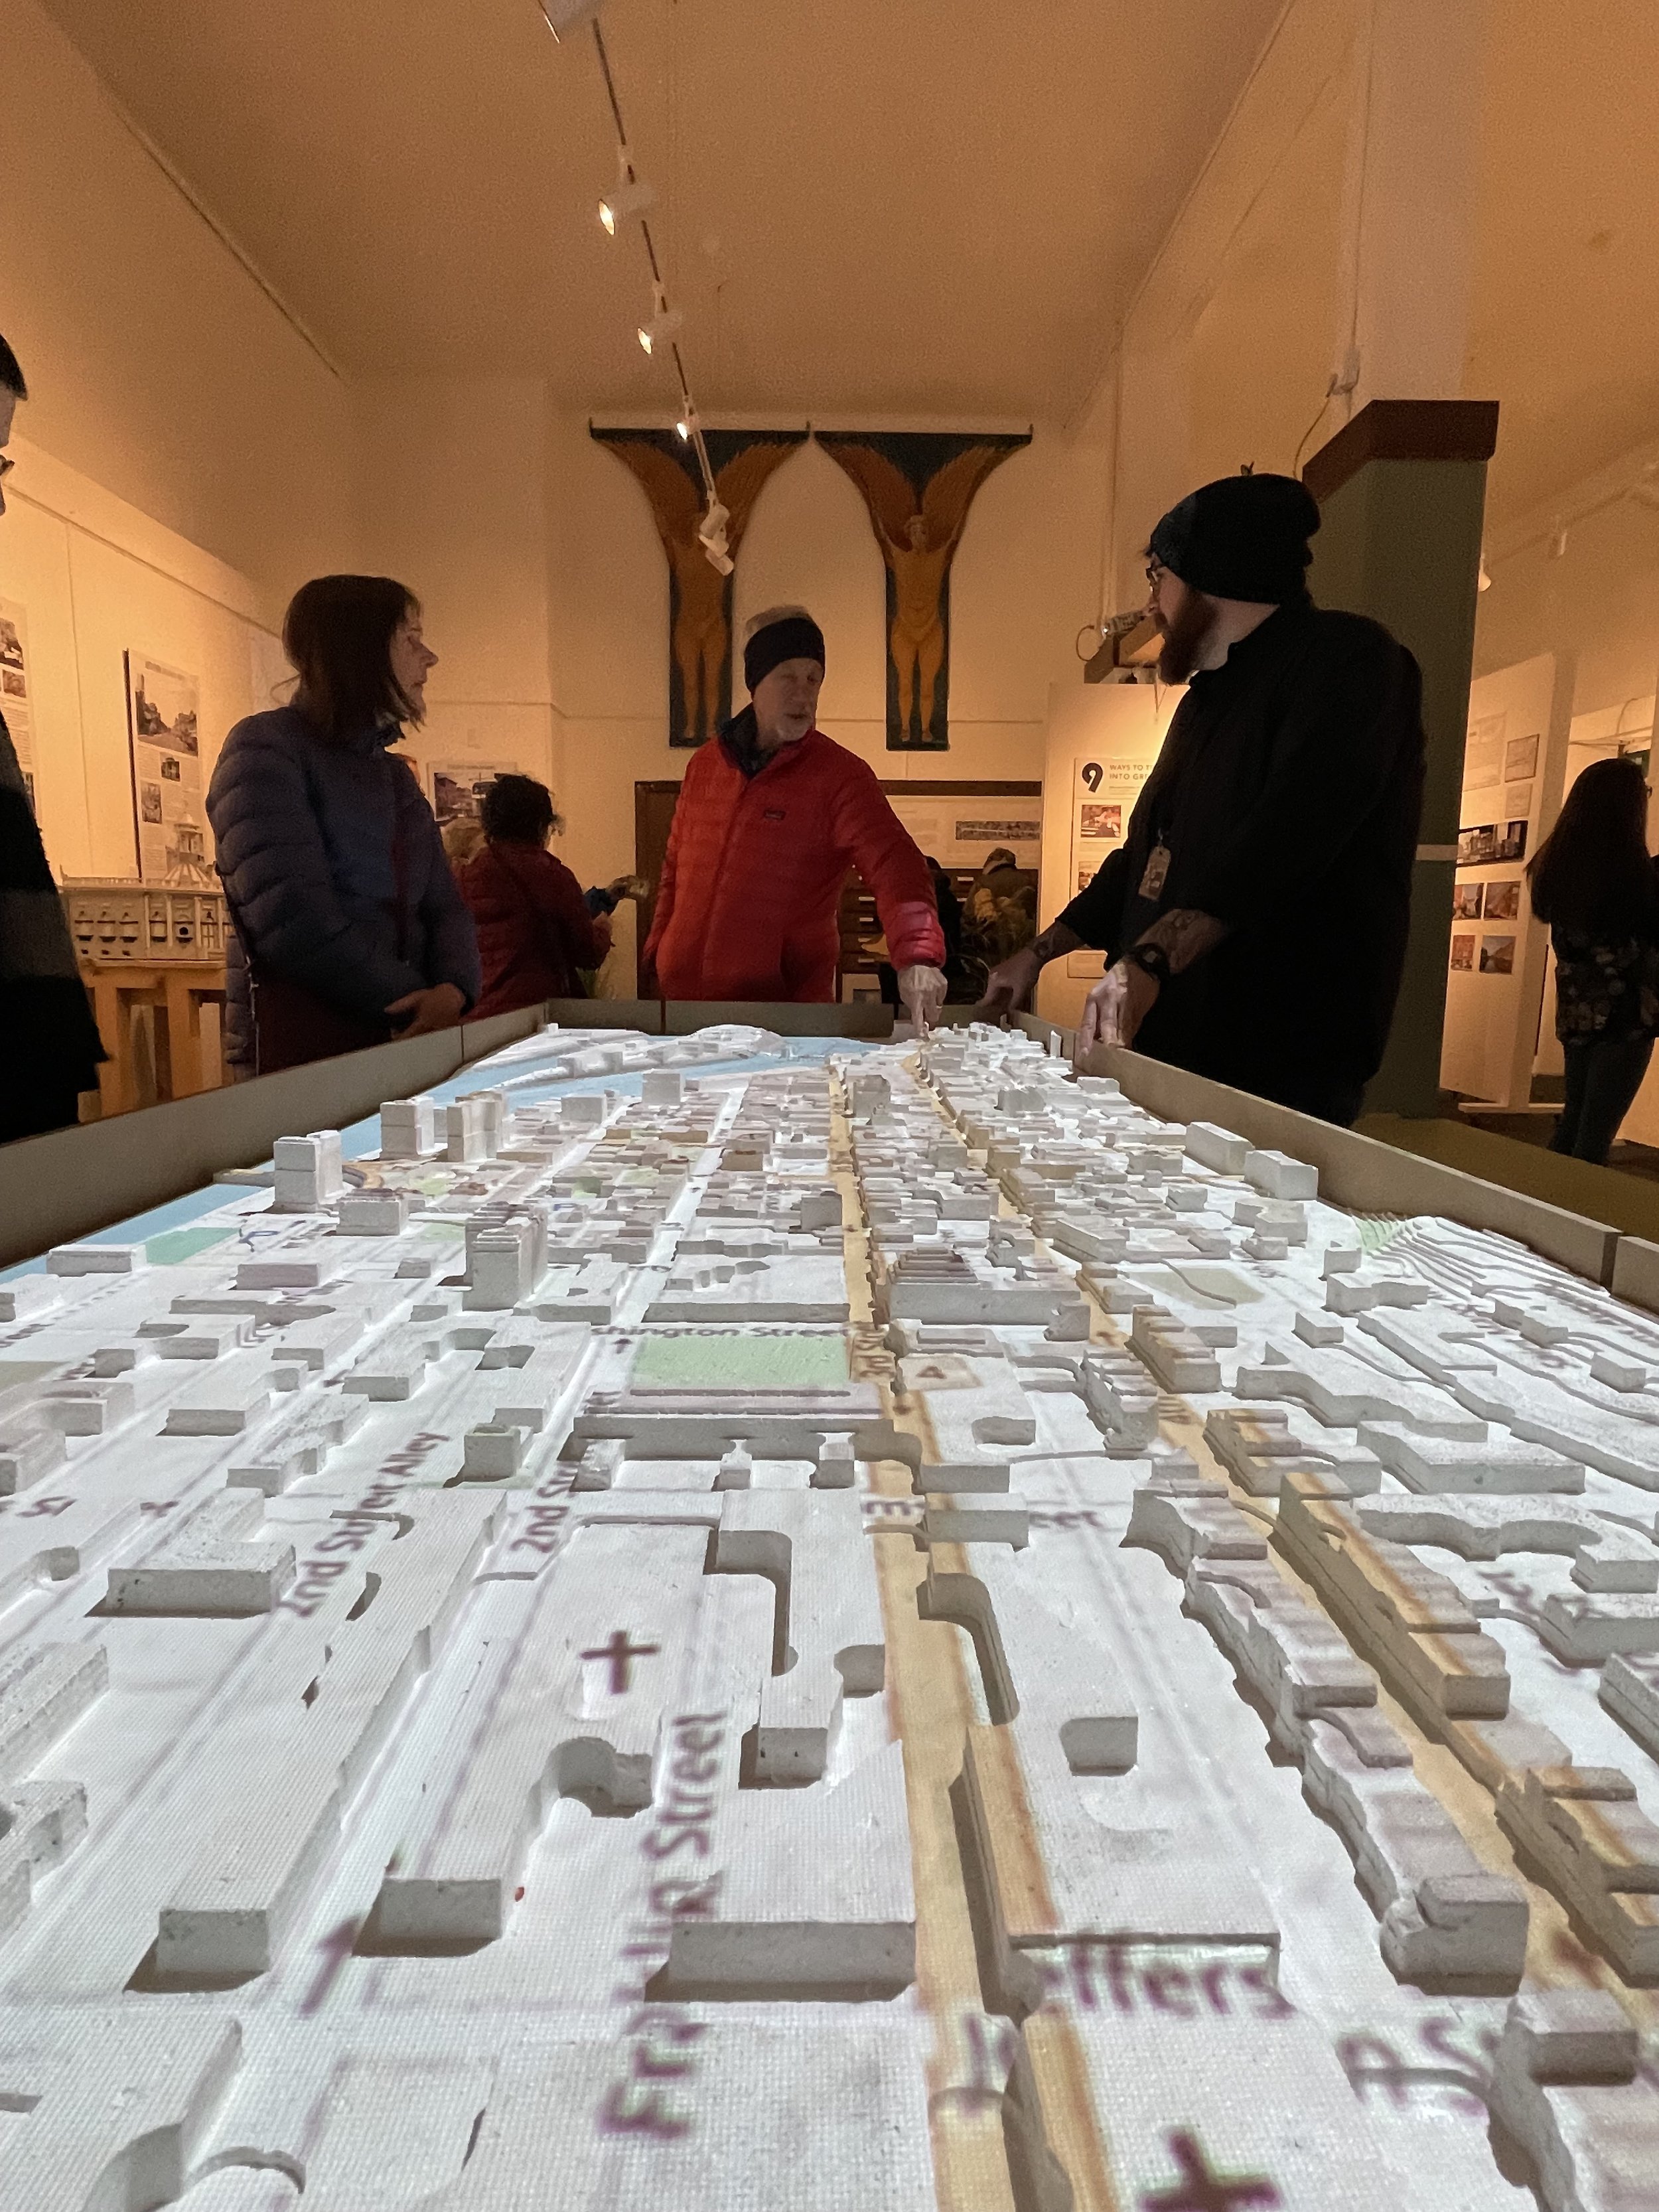   A 3D map of Downtown Troy featured various projections.  